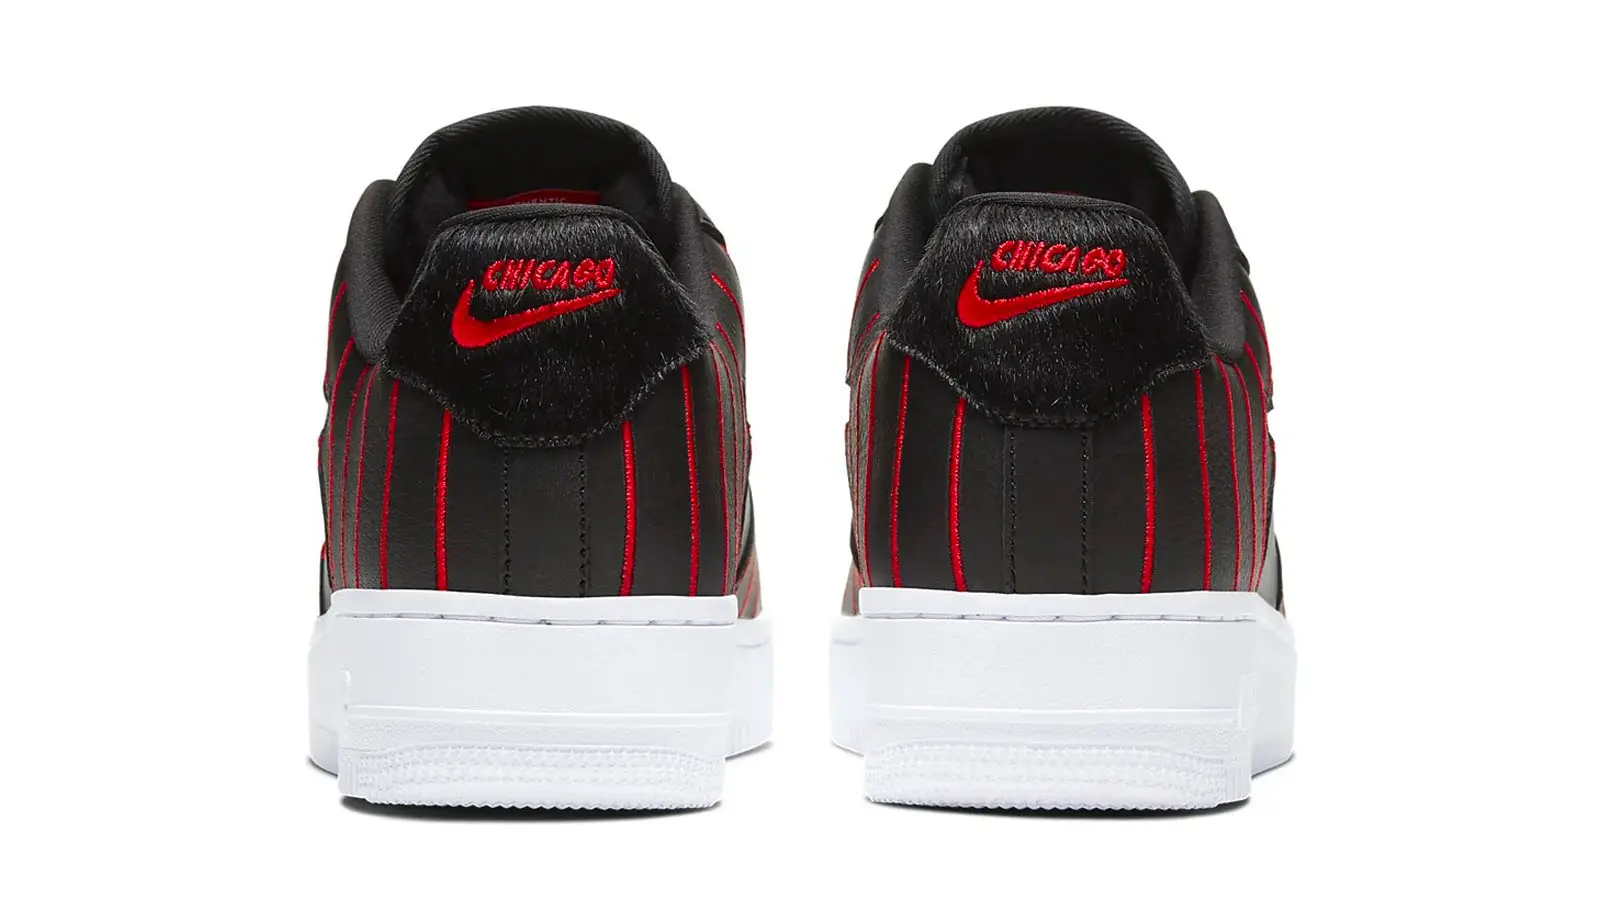 The Nike Air Force 1 Jewel Nods to the Chicago Bulls | The Sole Supplier